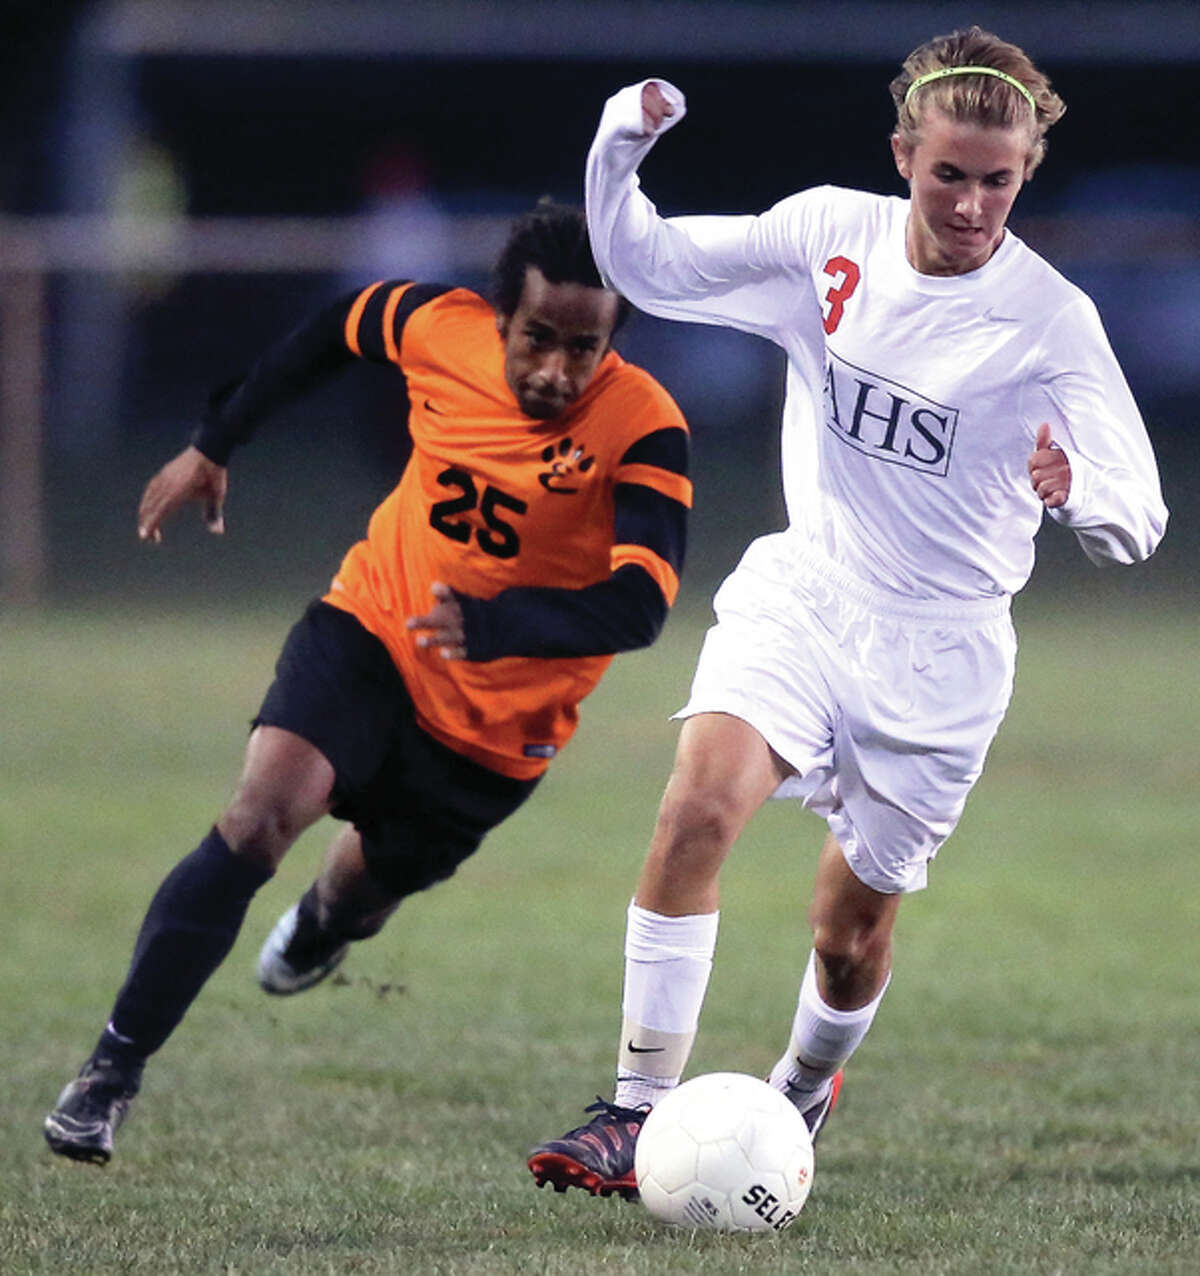 Edwardsville’s Hamada Freese (left) pursues the play while Alton’s Adam Kane (3) pushes the ball upfield during the Redbirds’ 1-0 SWC victory over the Tigers on Thursday night at Moore Park in Alton.